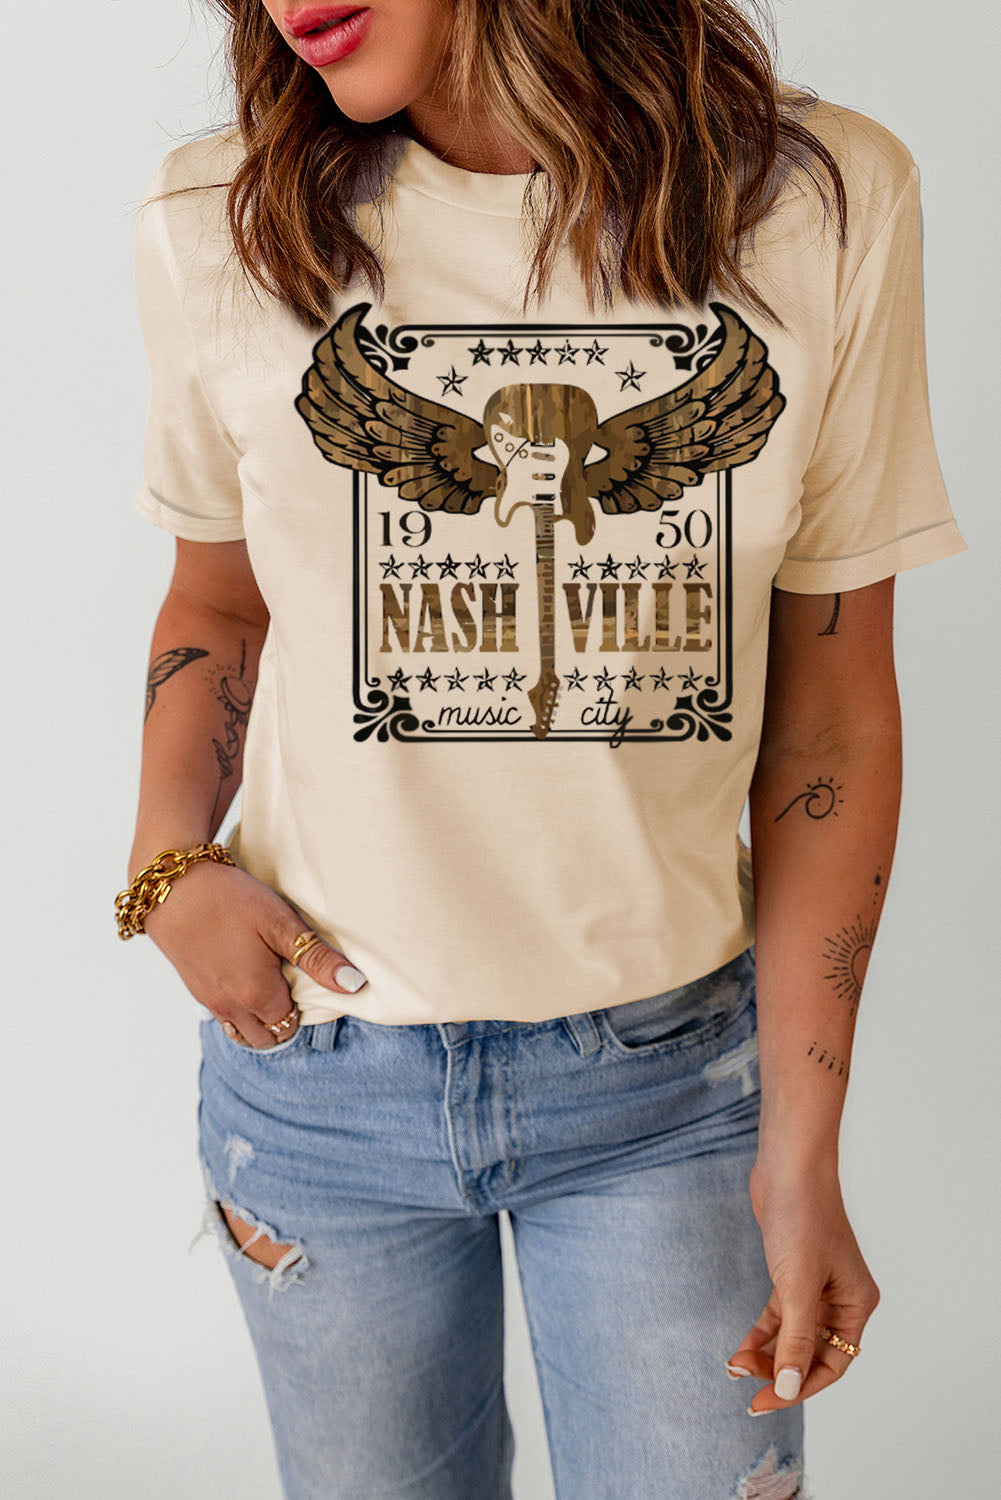 Transport Yourself to the Enchanting 1950 Nashville Music Scene - Indulge in Comfort and Style with Our Luxurious Graphic Tee Shirt - Stand Out Effortlessly! - Guy Christopher 